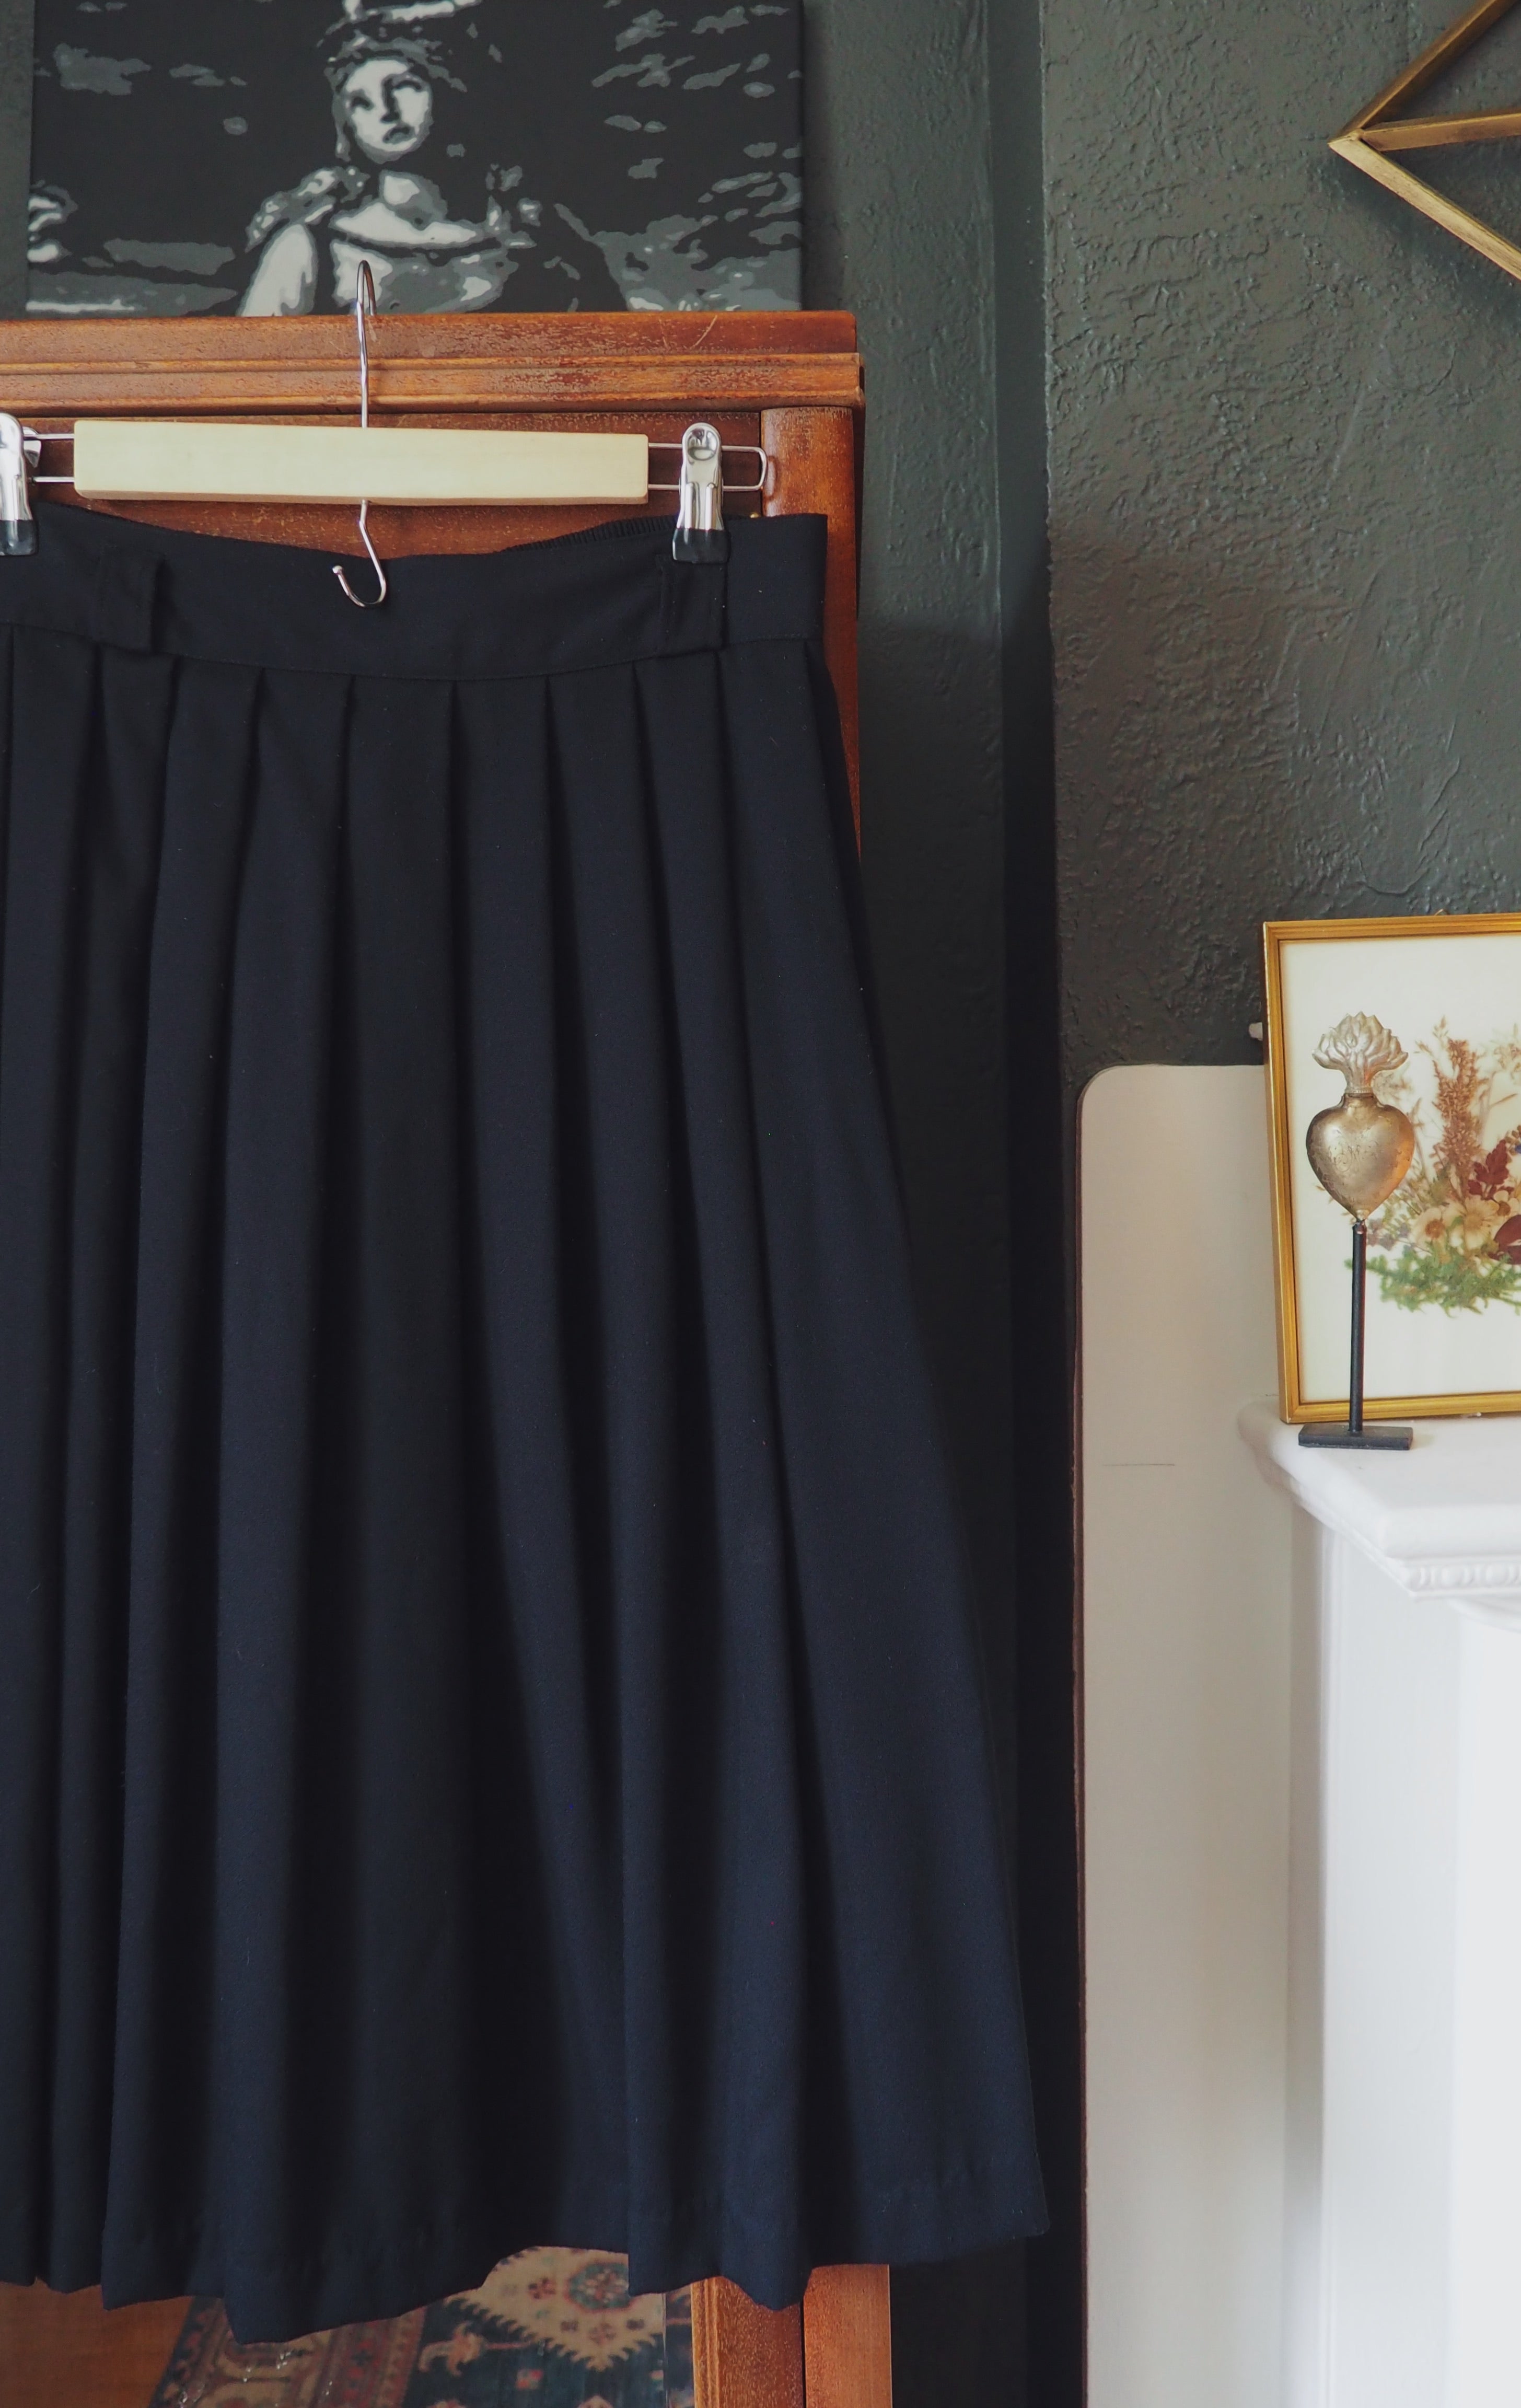 Vintage Made in the USA Pleated Black Midi Skirt